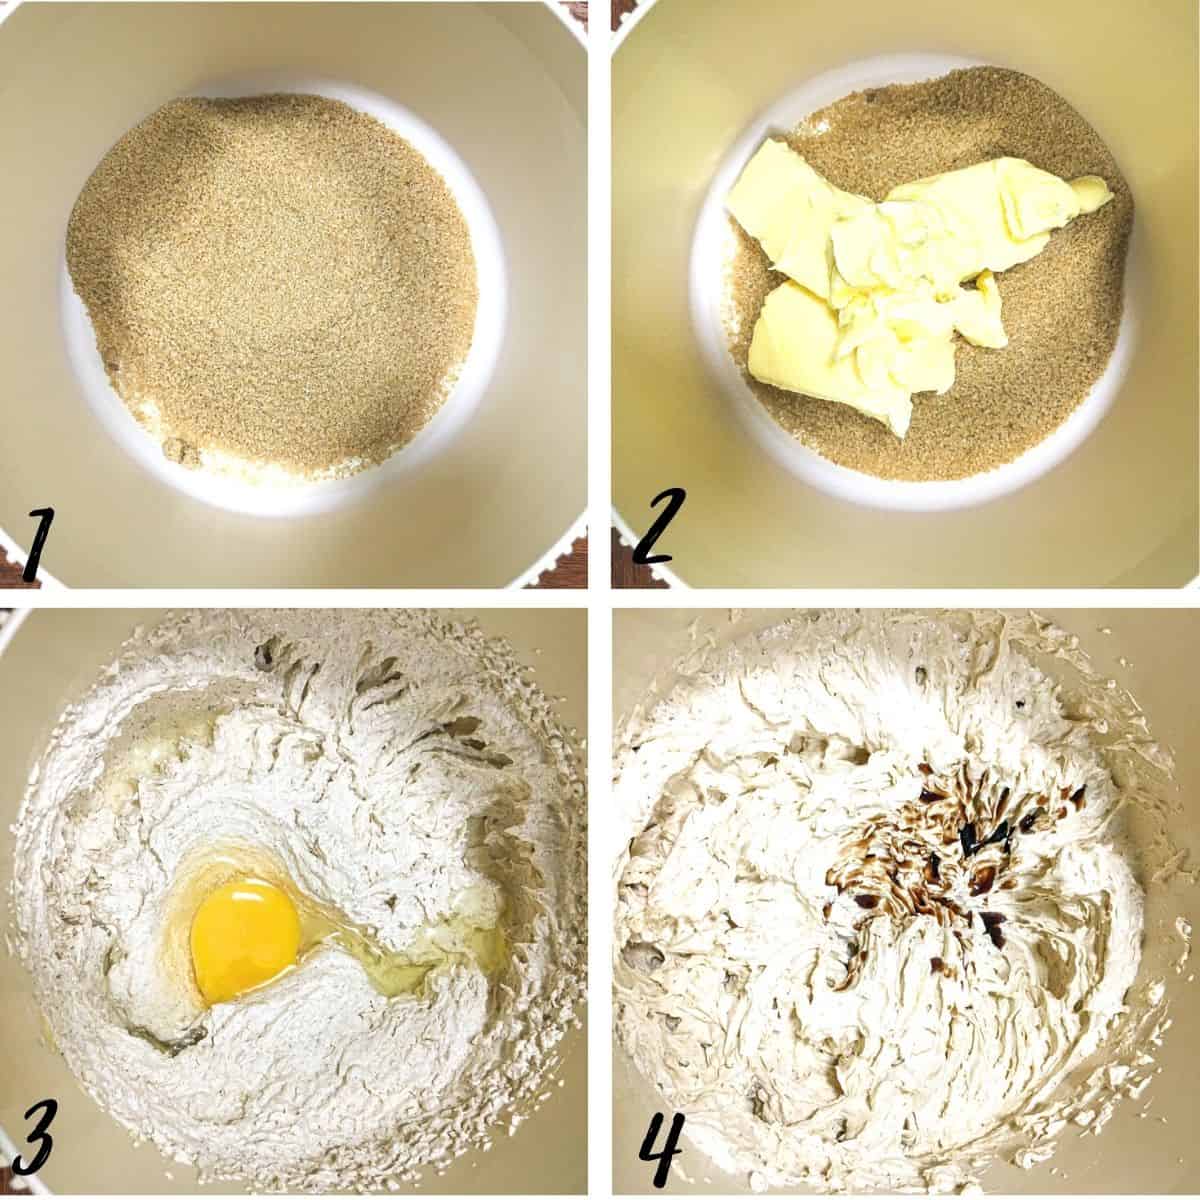 A poster of 4 images showing how to mix cake batter